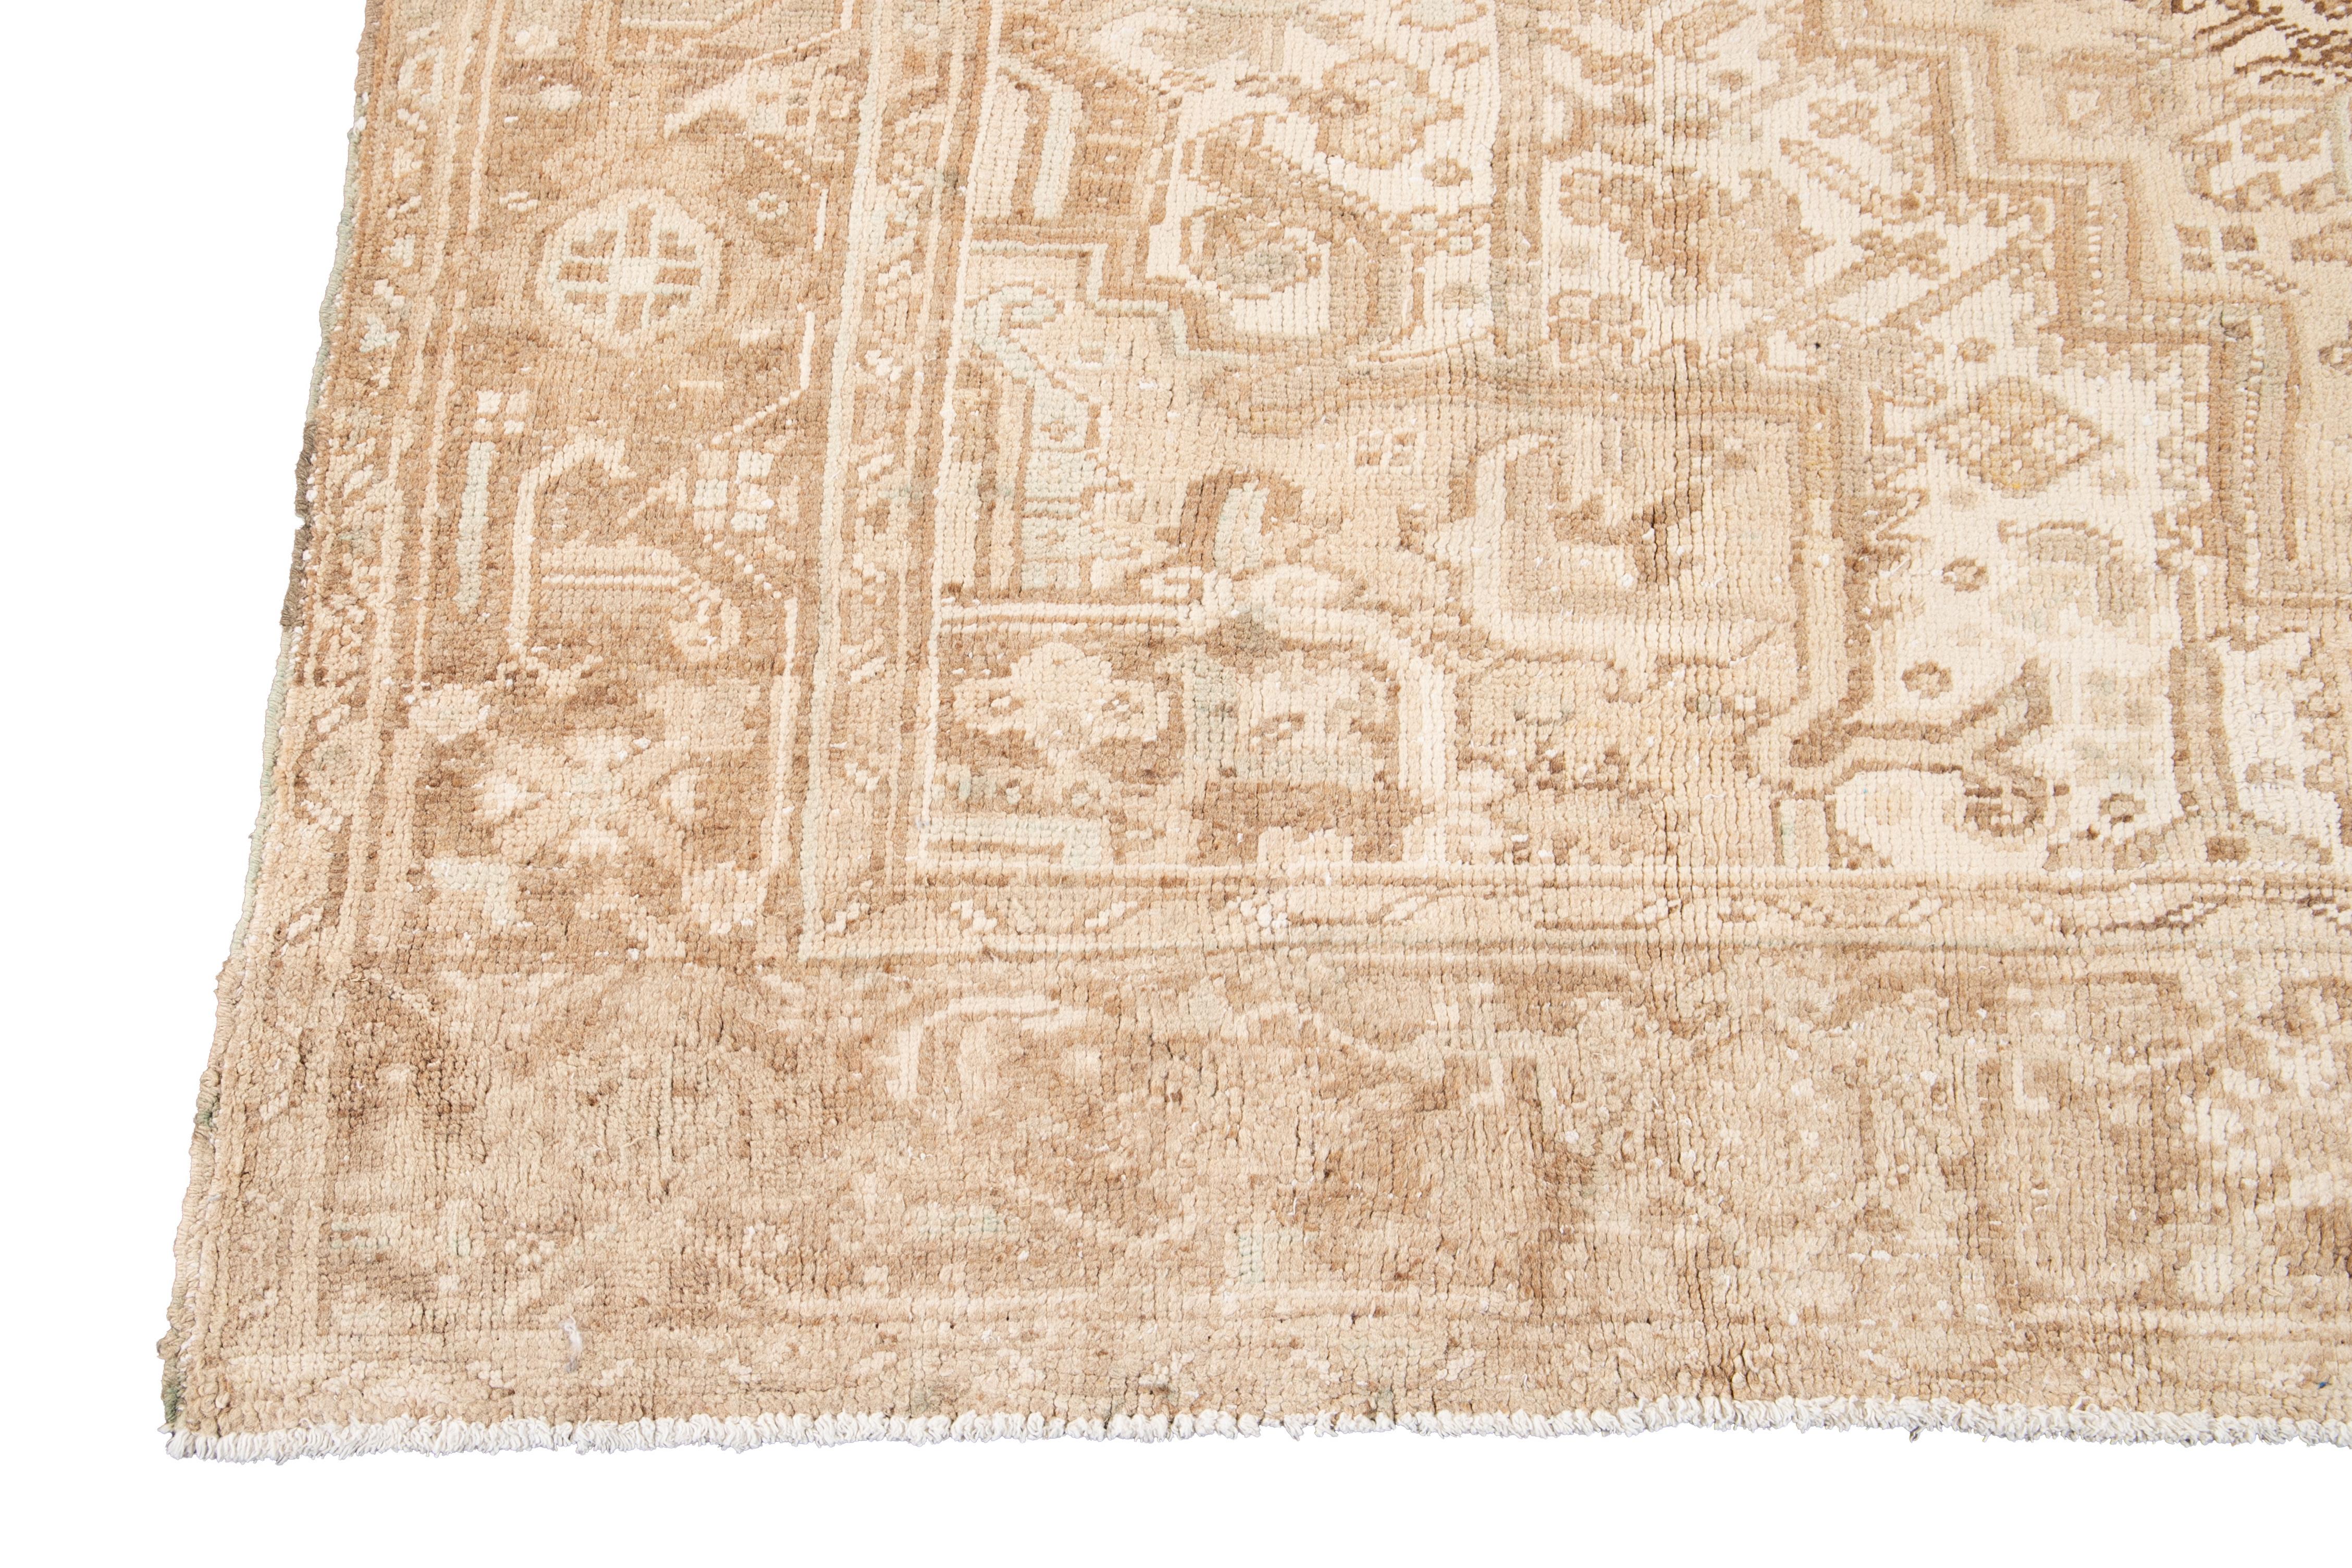 Early 20th Century Handmade Antique Persian Heriz Wool Rug In Beige Allover Motif For Sale